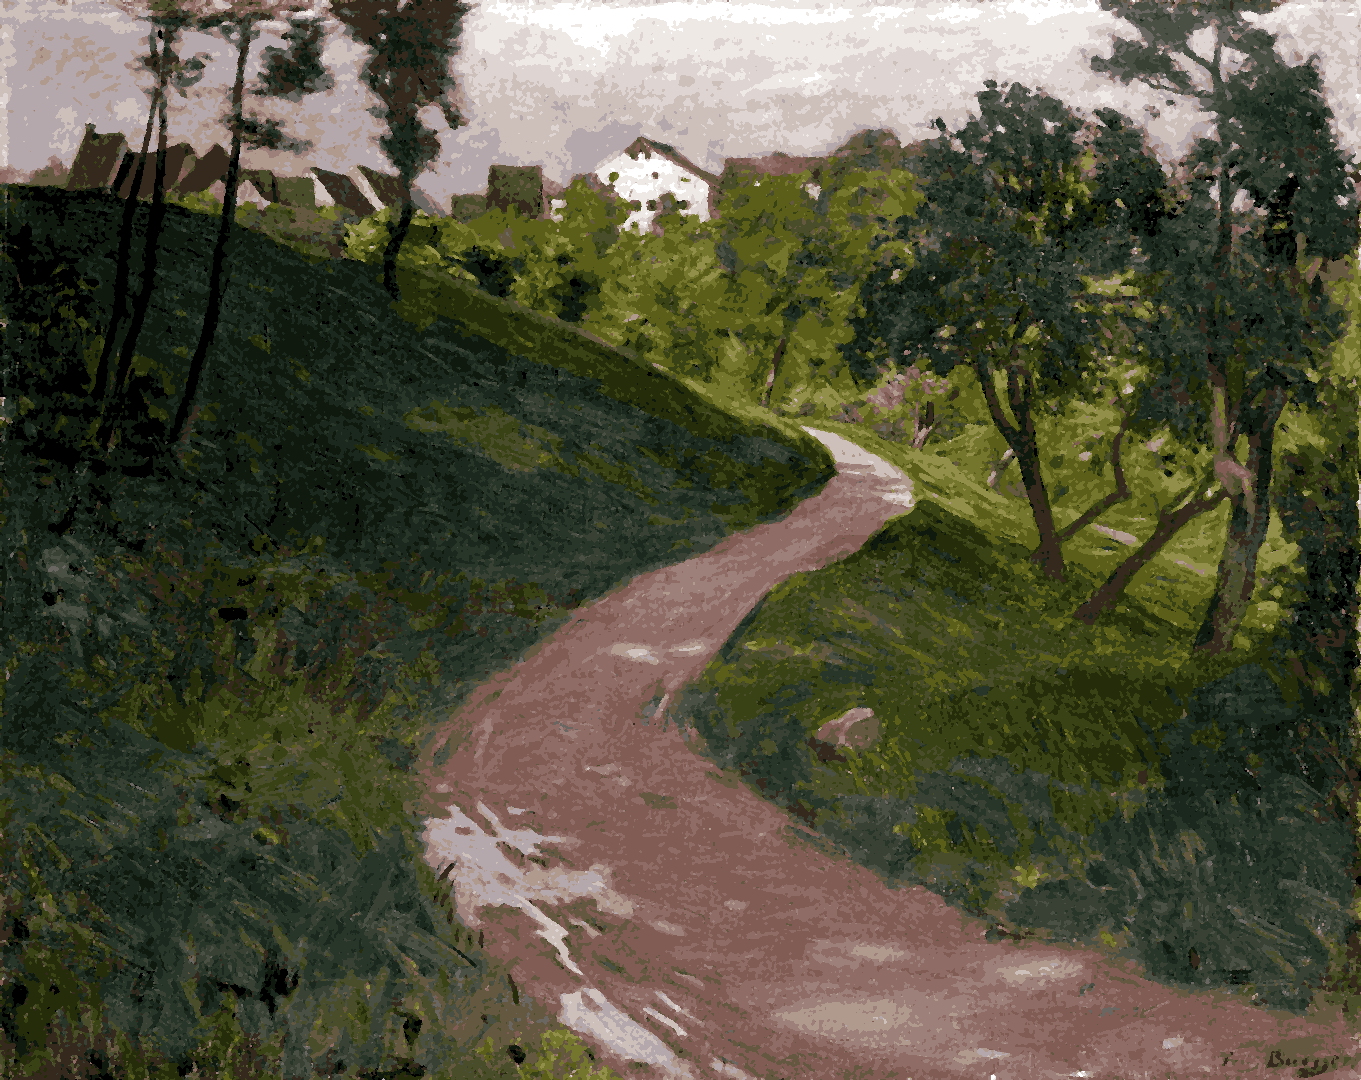 Country Road on a Hill by Fritz Burger - Van-Go Paint-By-Number